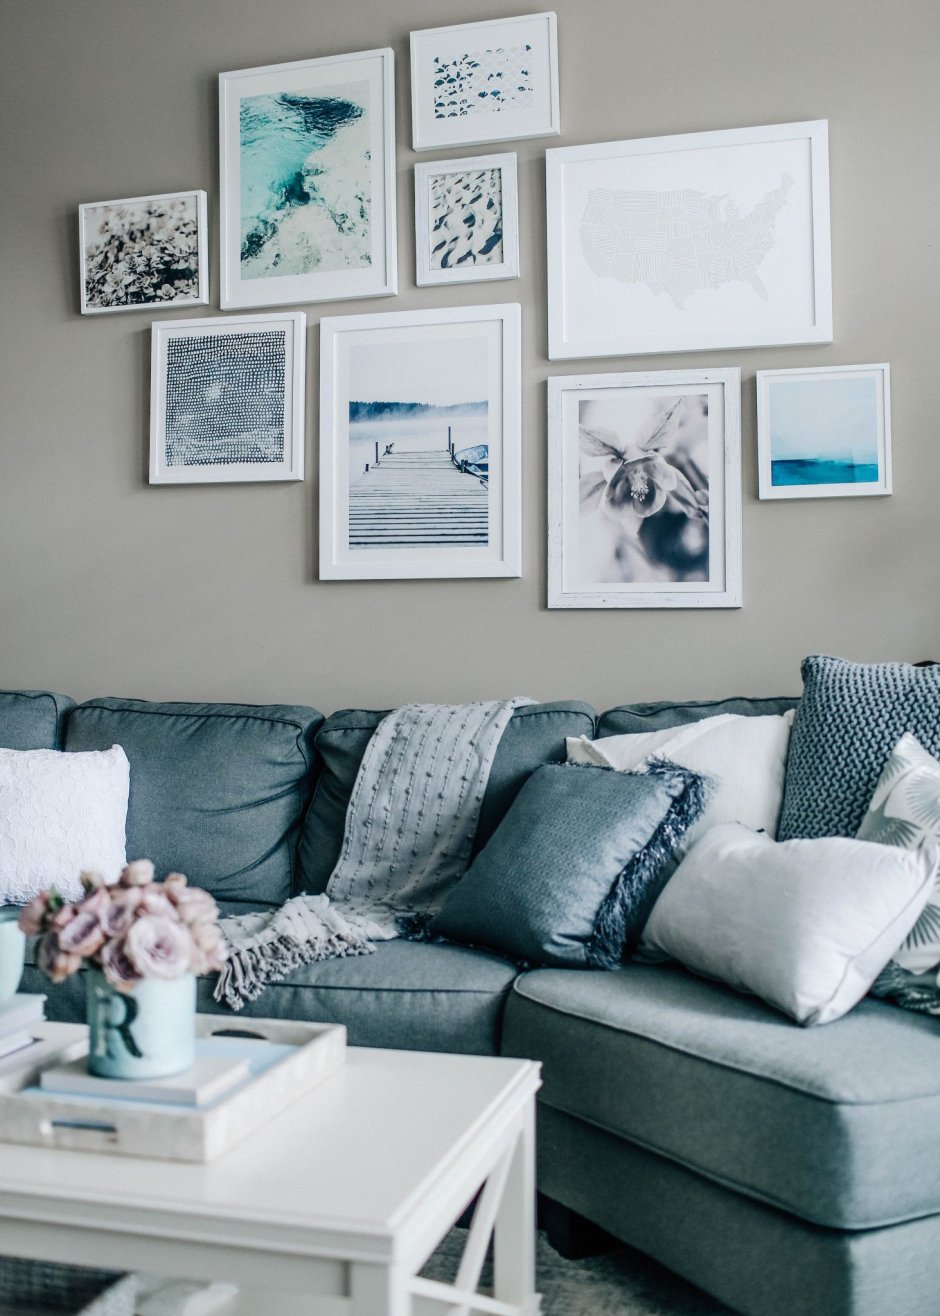 Royal blue grey and white living room